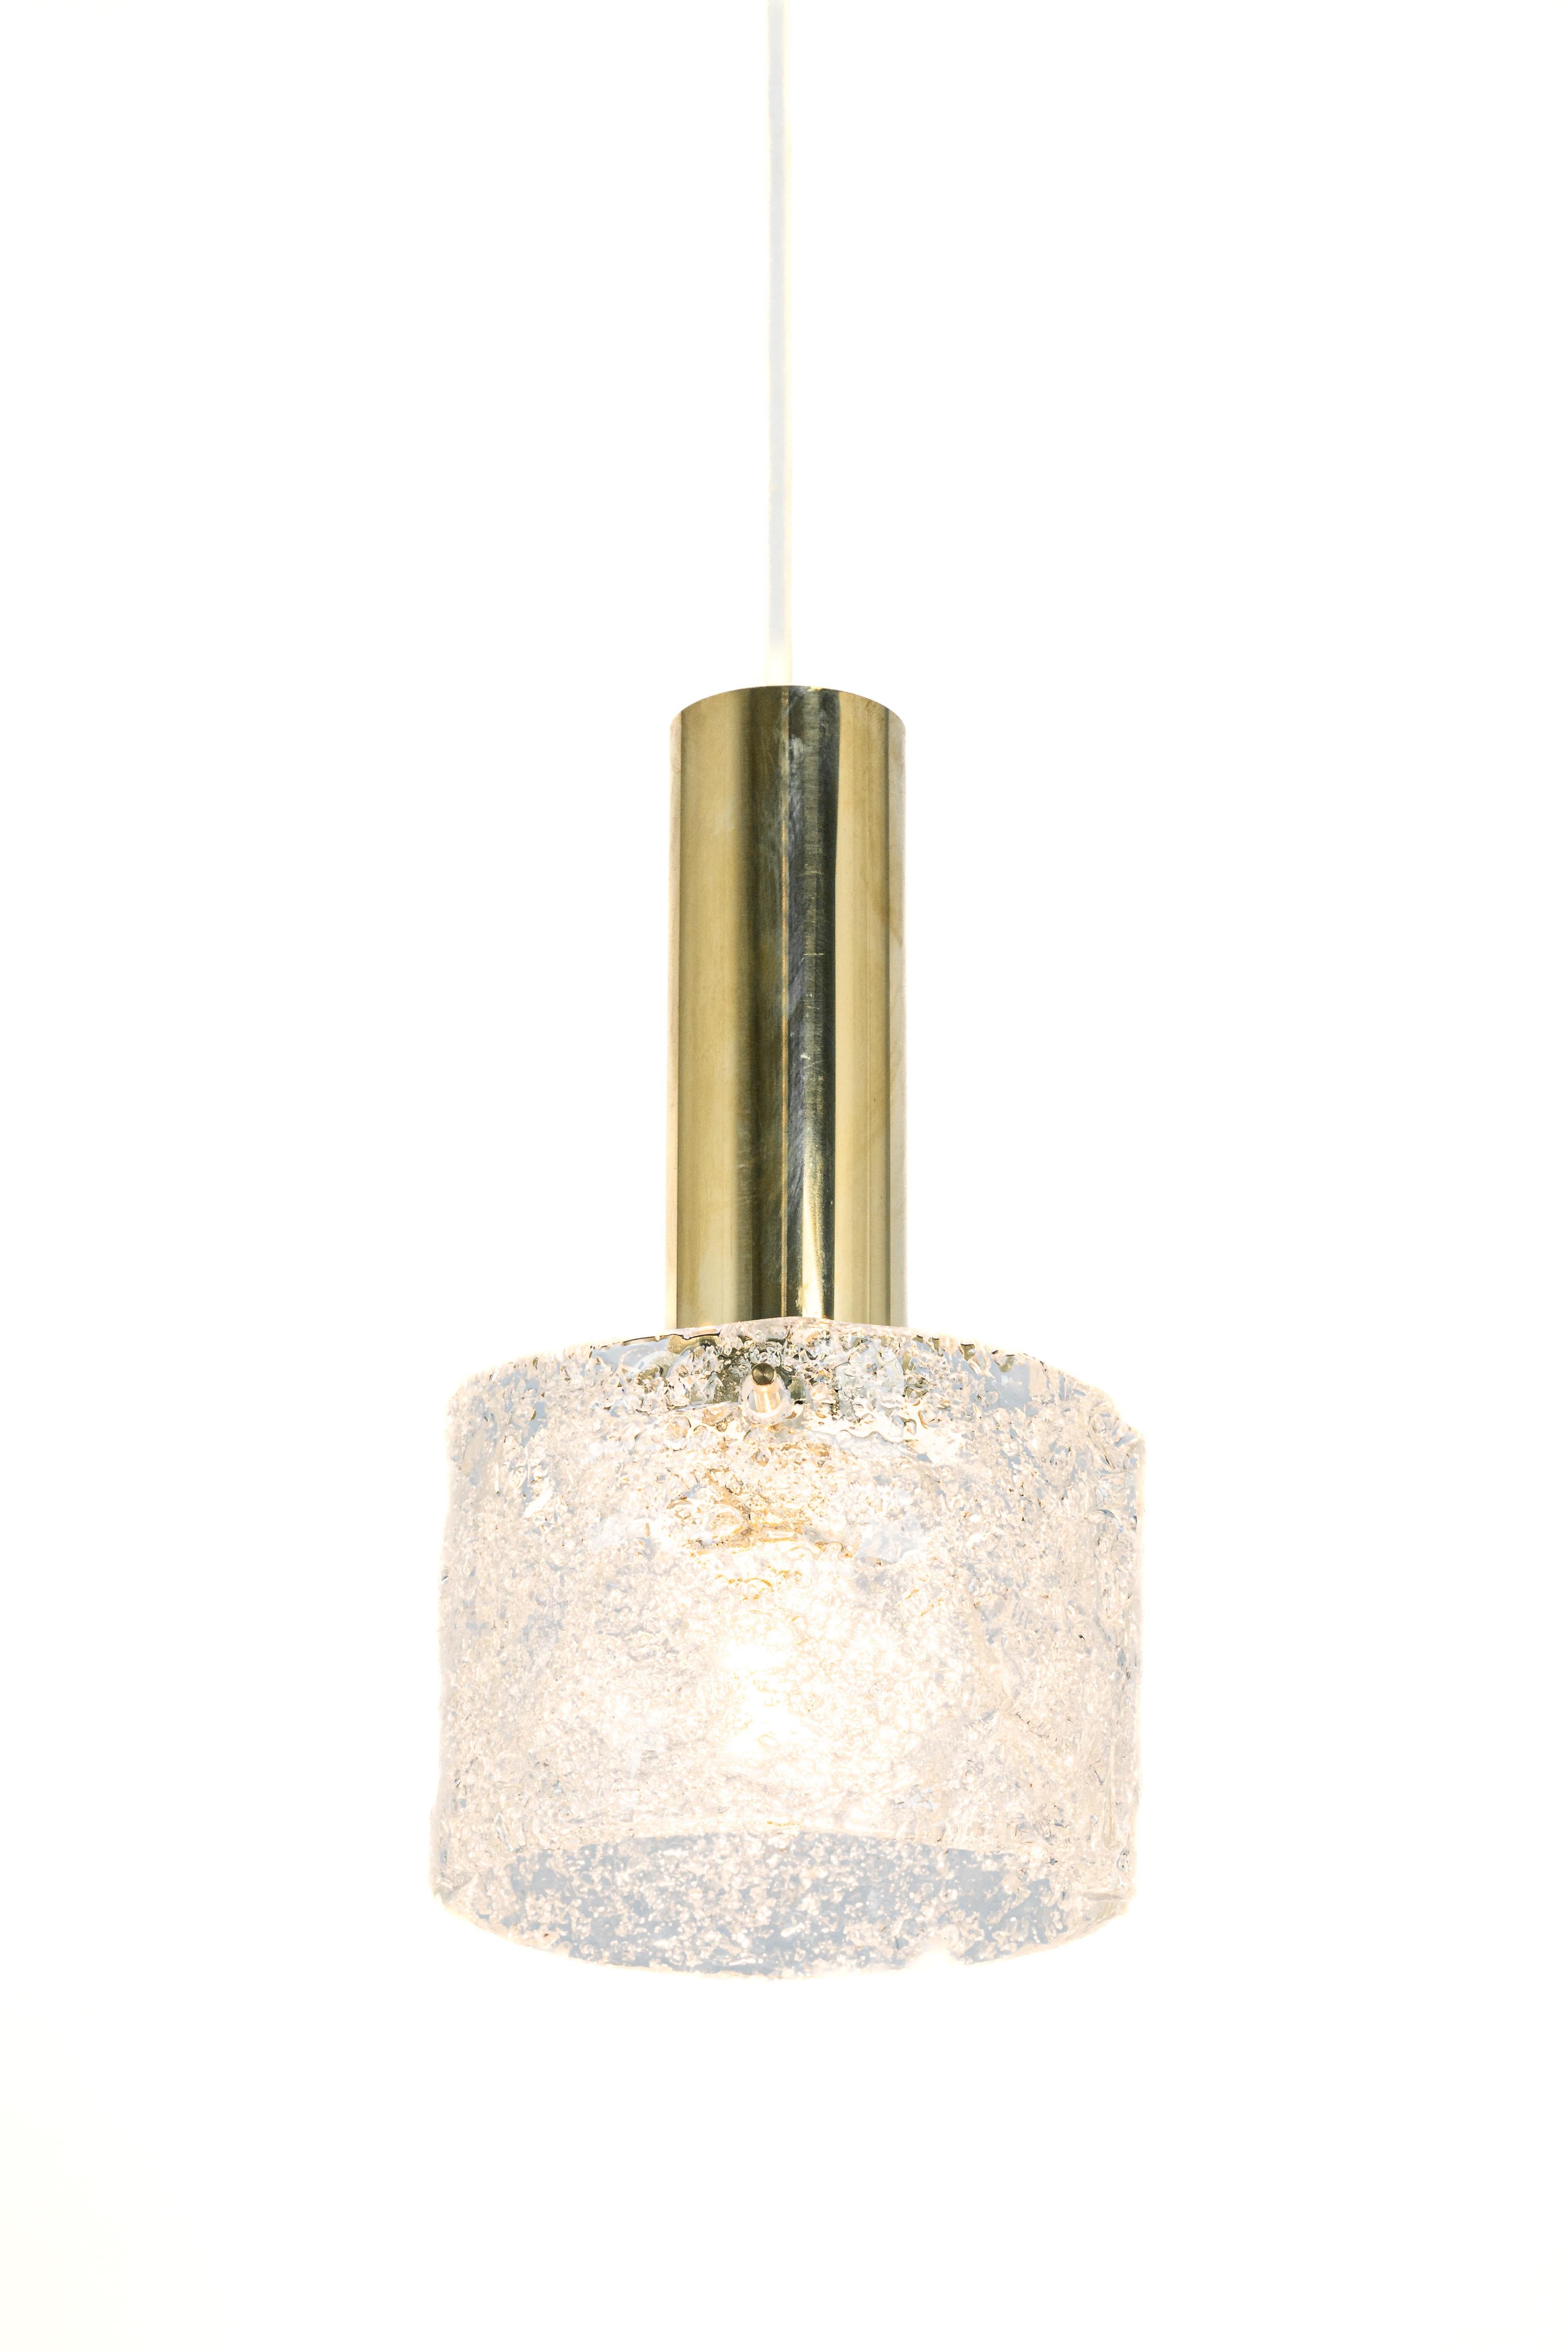 1 of 4 Petite Murano Pendant Lights by Hillebrand, 1960s For Sale 1